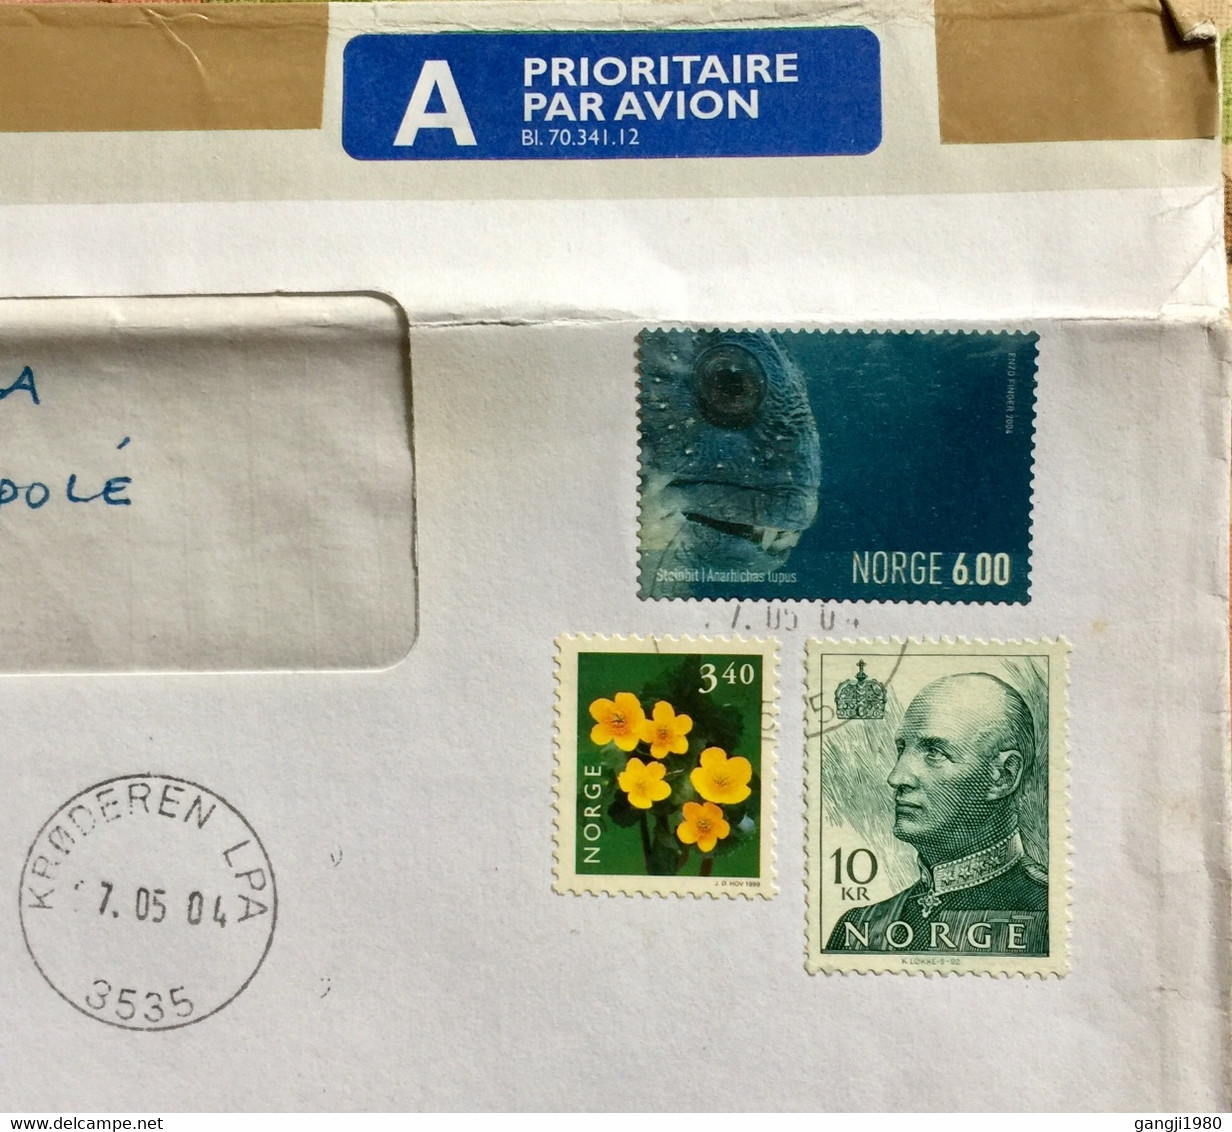 NORWAY 2004,AIRMAIL USED COVER TO LITHUANIA, KRODERN LPA,MARIJAMPOLE, CANCELLATION,19=40 KROWN RATE !!! FISH ,FLOWER, - Brieven En Documenten